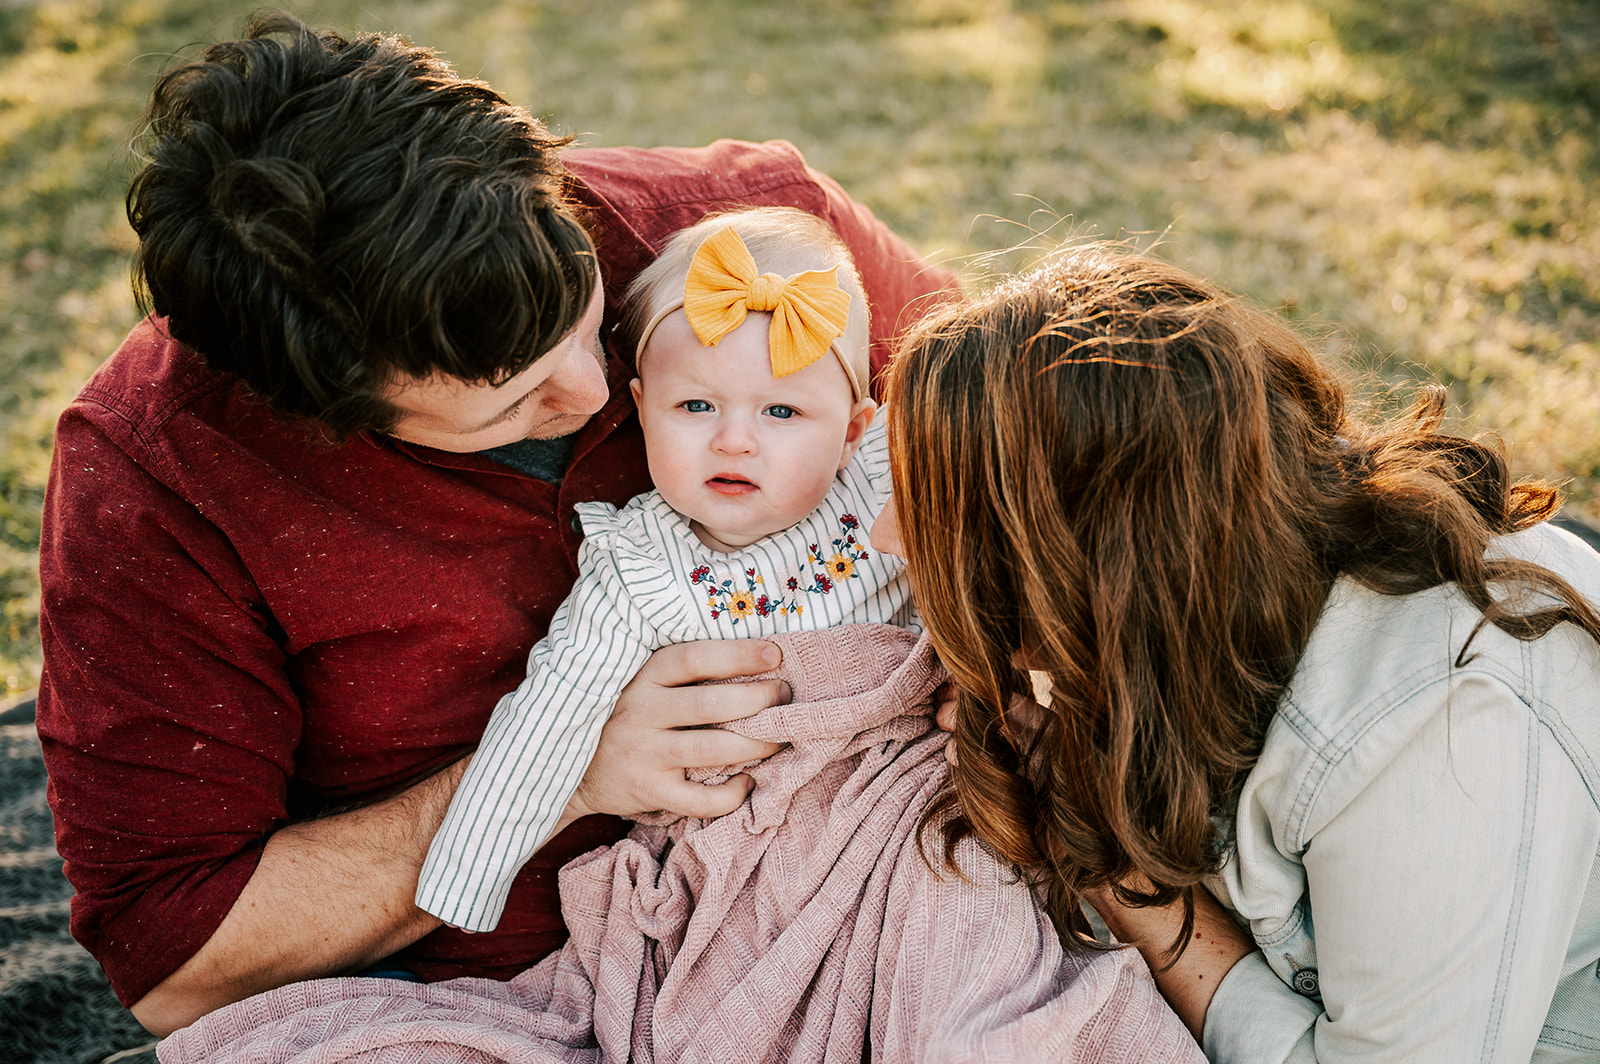 A mom and dad smile down at and tickle their infant daughter in dad's lap in a park while sitting on a blanket